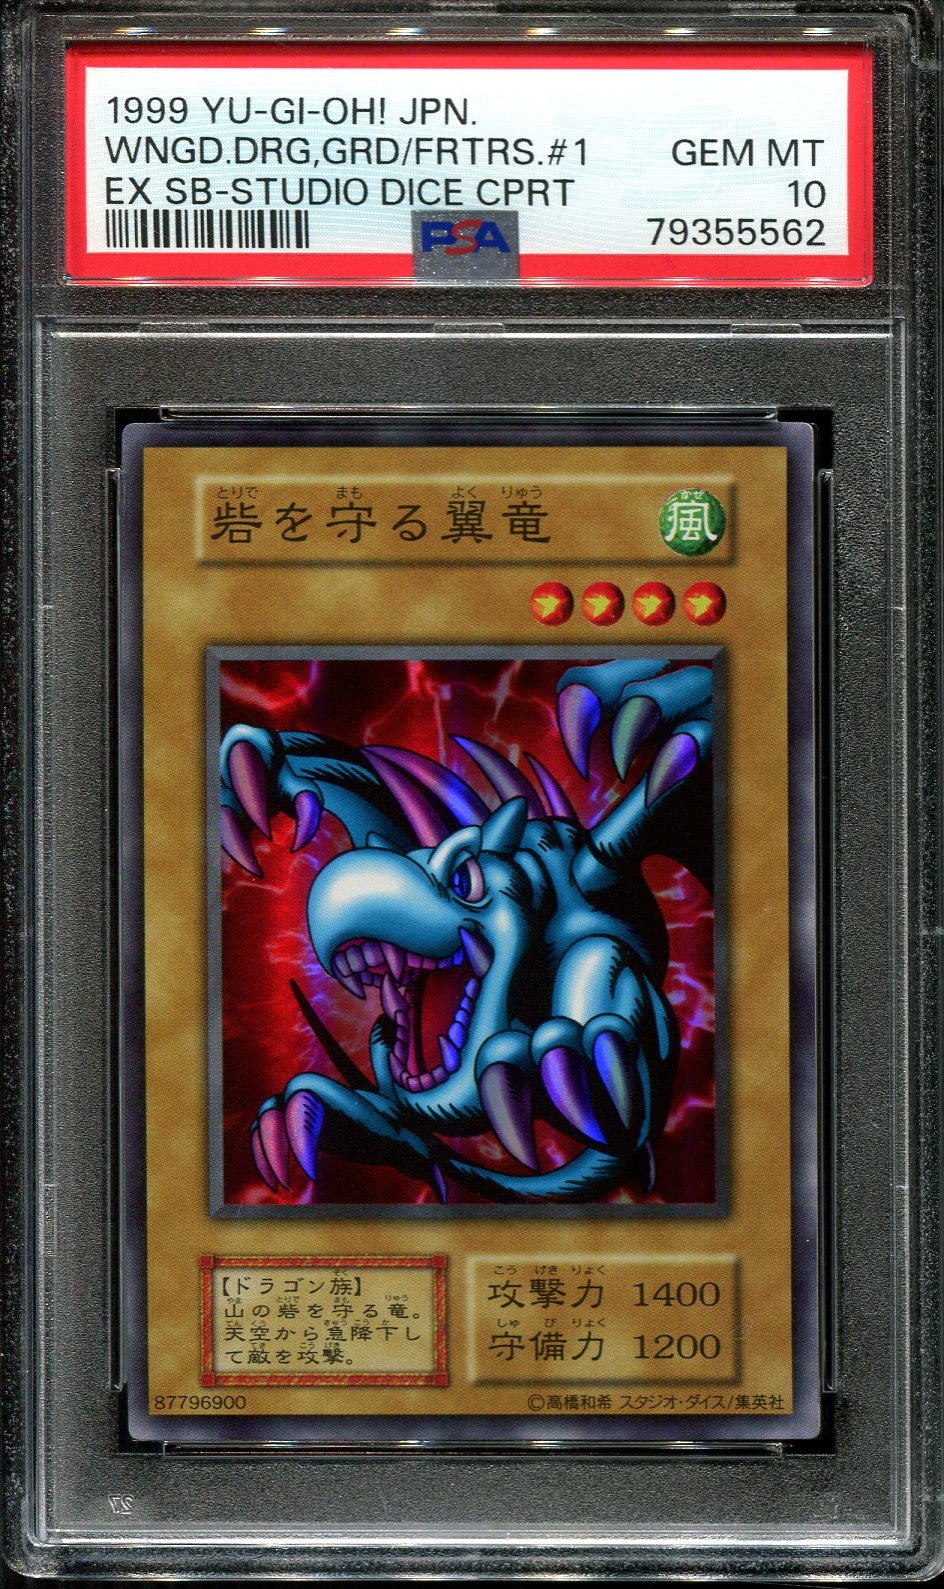 YUGIOH - PSA 10 - WINGED DRAGON GUARDIAN OF THE FORTRESS - EX STARTER BOX - JAPANESE OCG